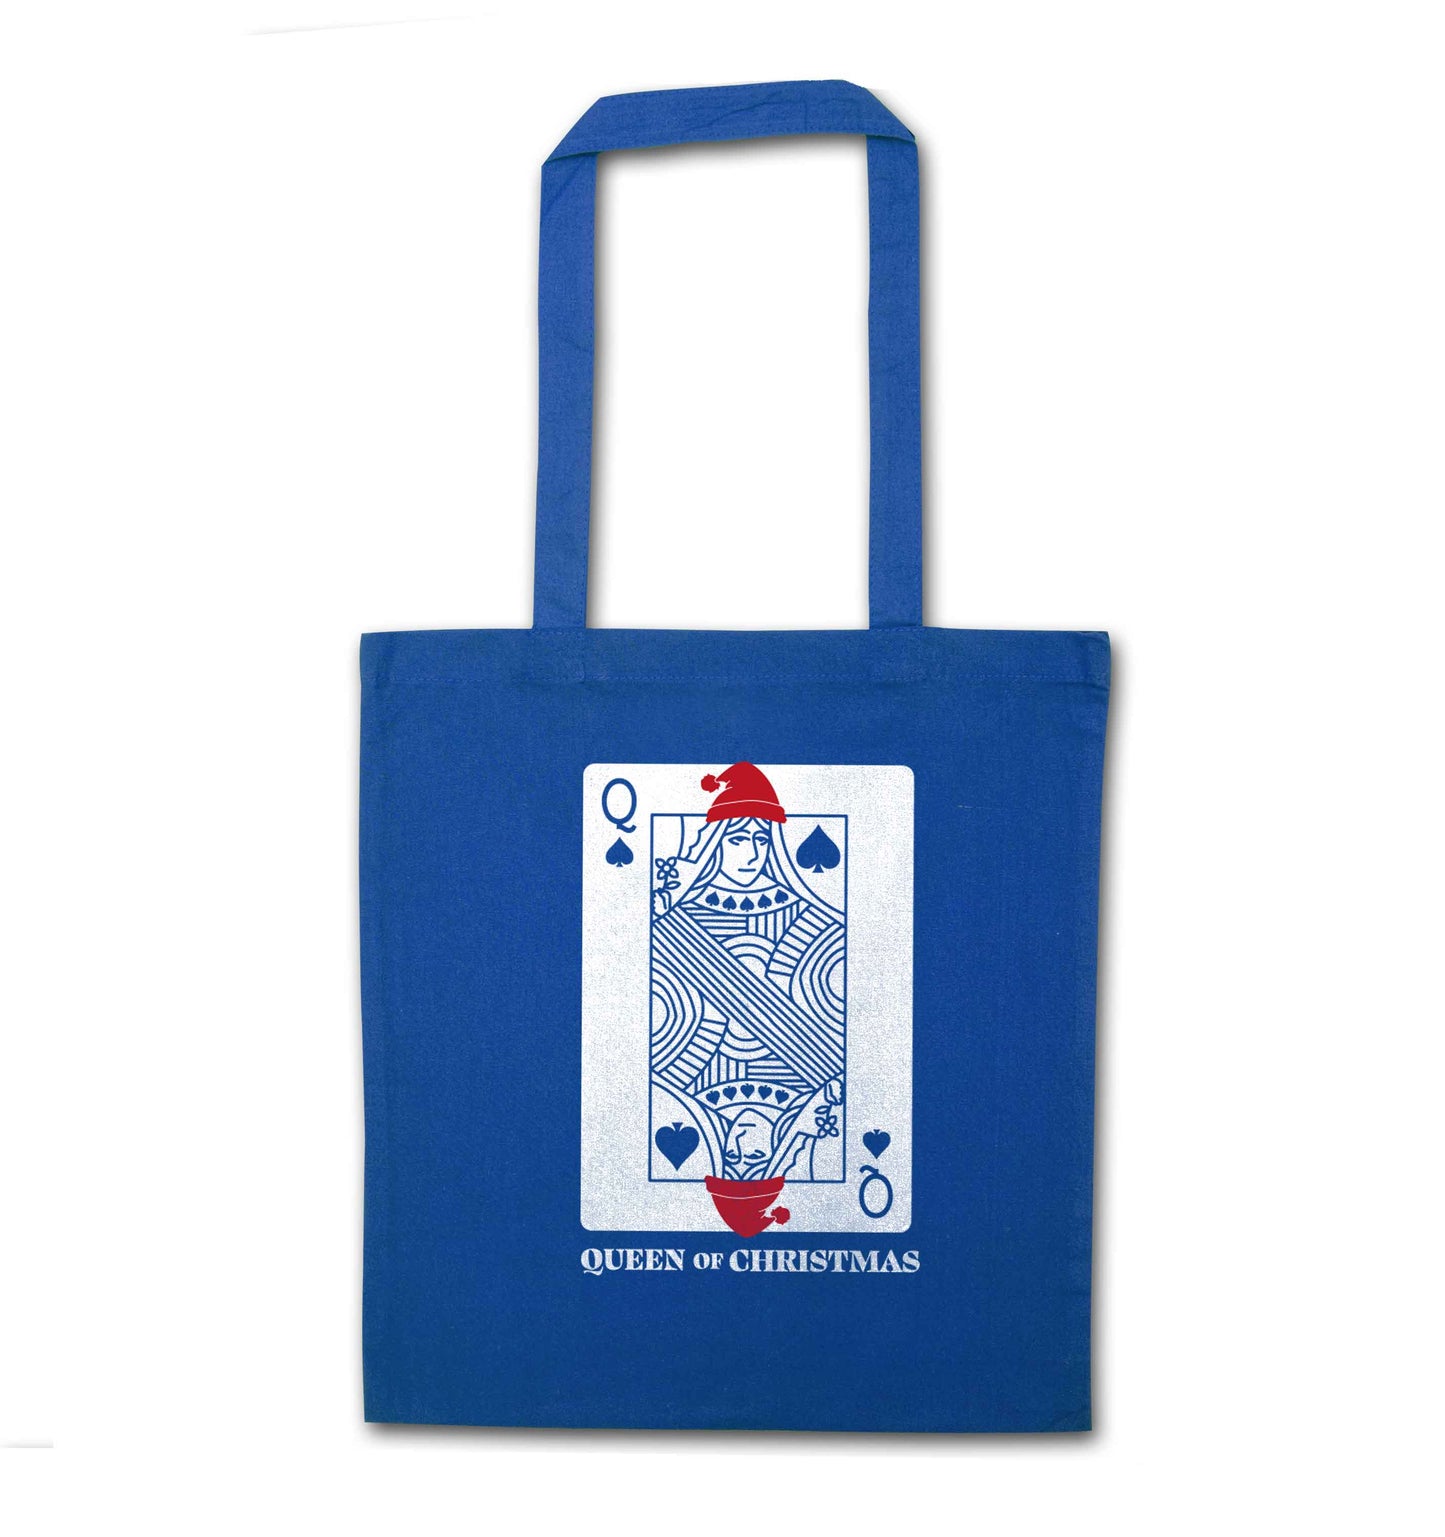 Queen of christmas blue tote bag